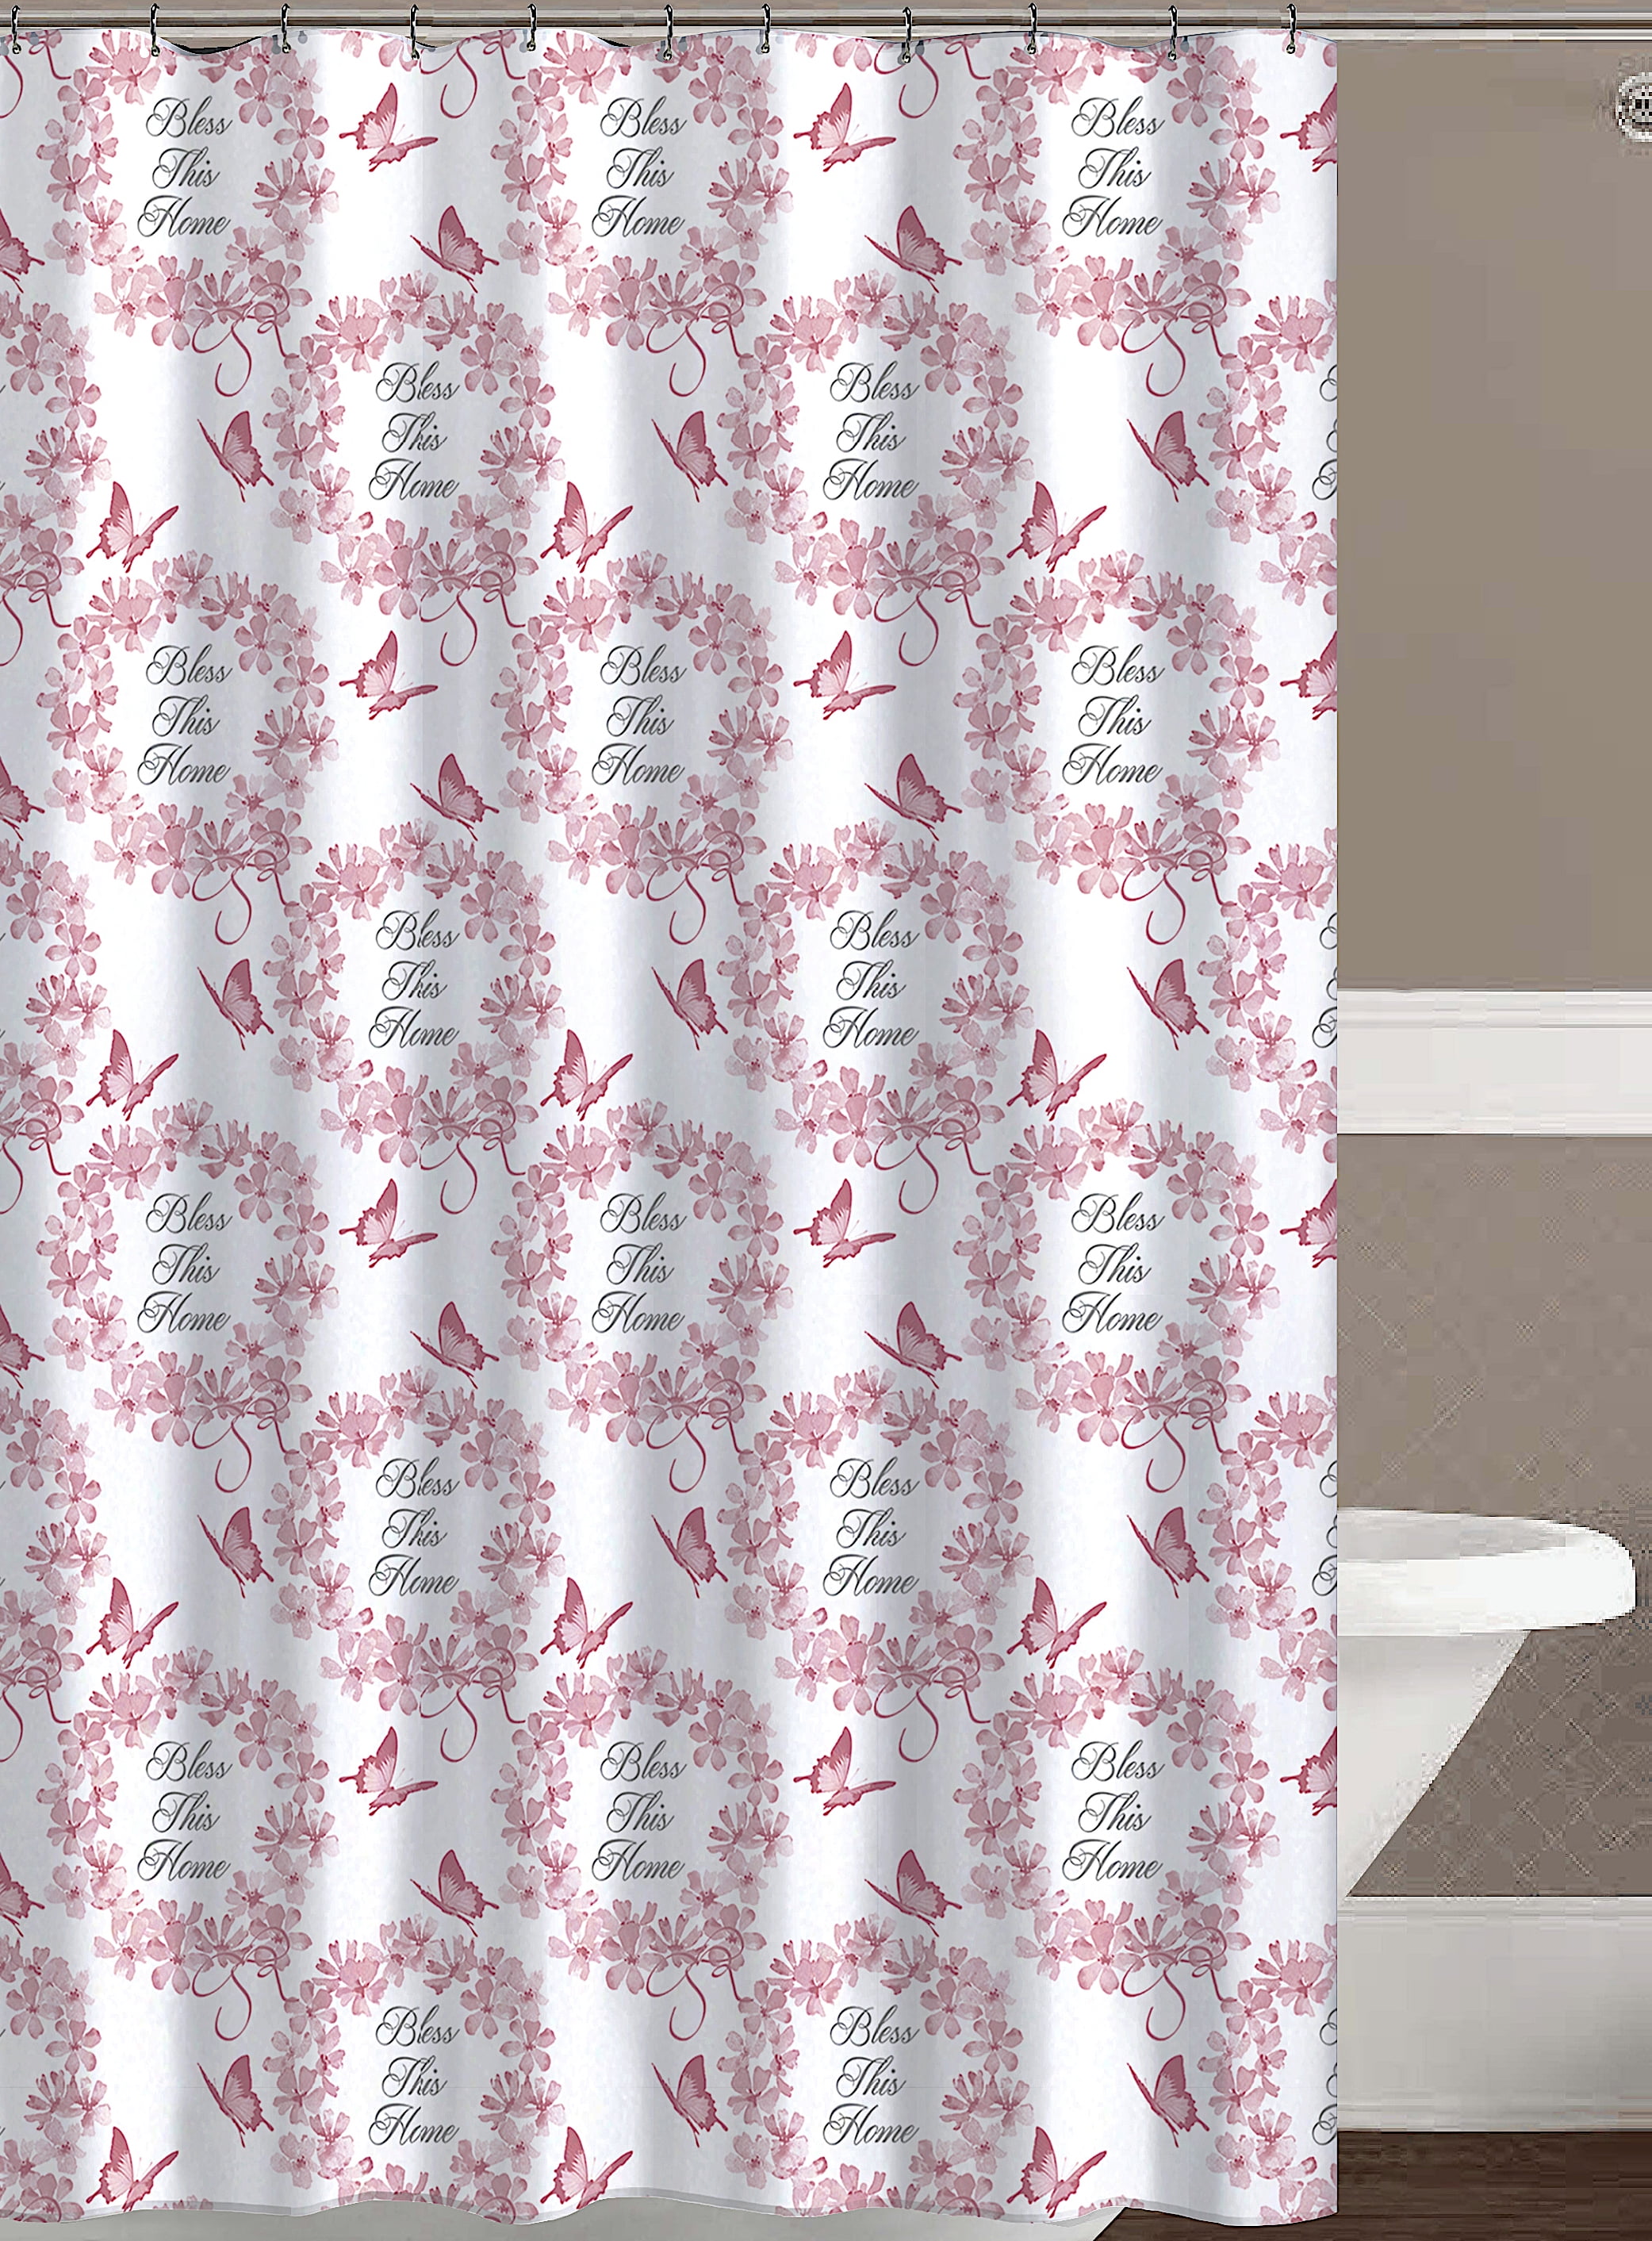 Country Pink Wreath Shower Curtain For, Cranberry Colored Shower Curtain